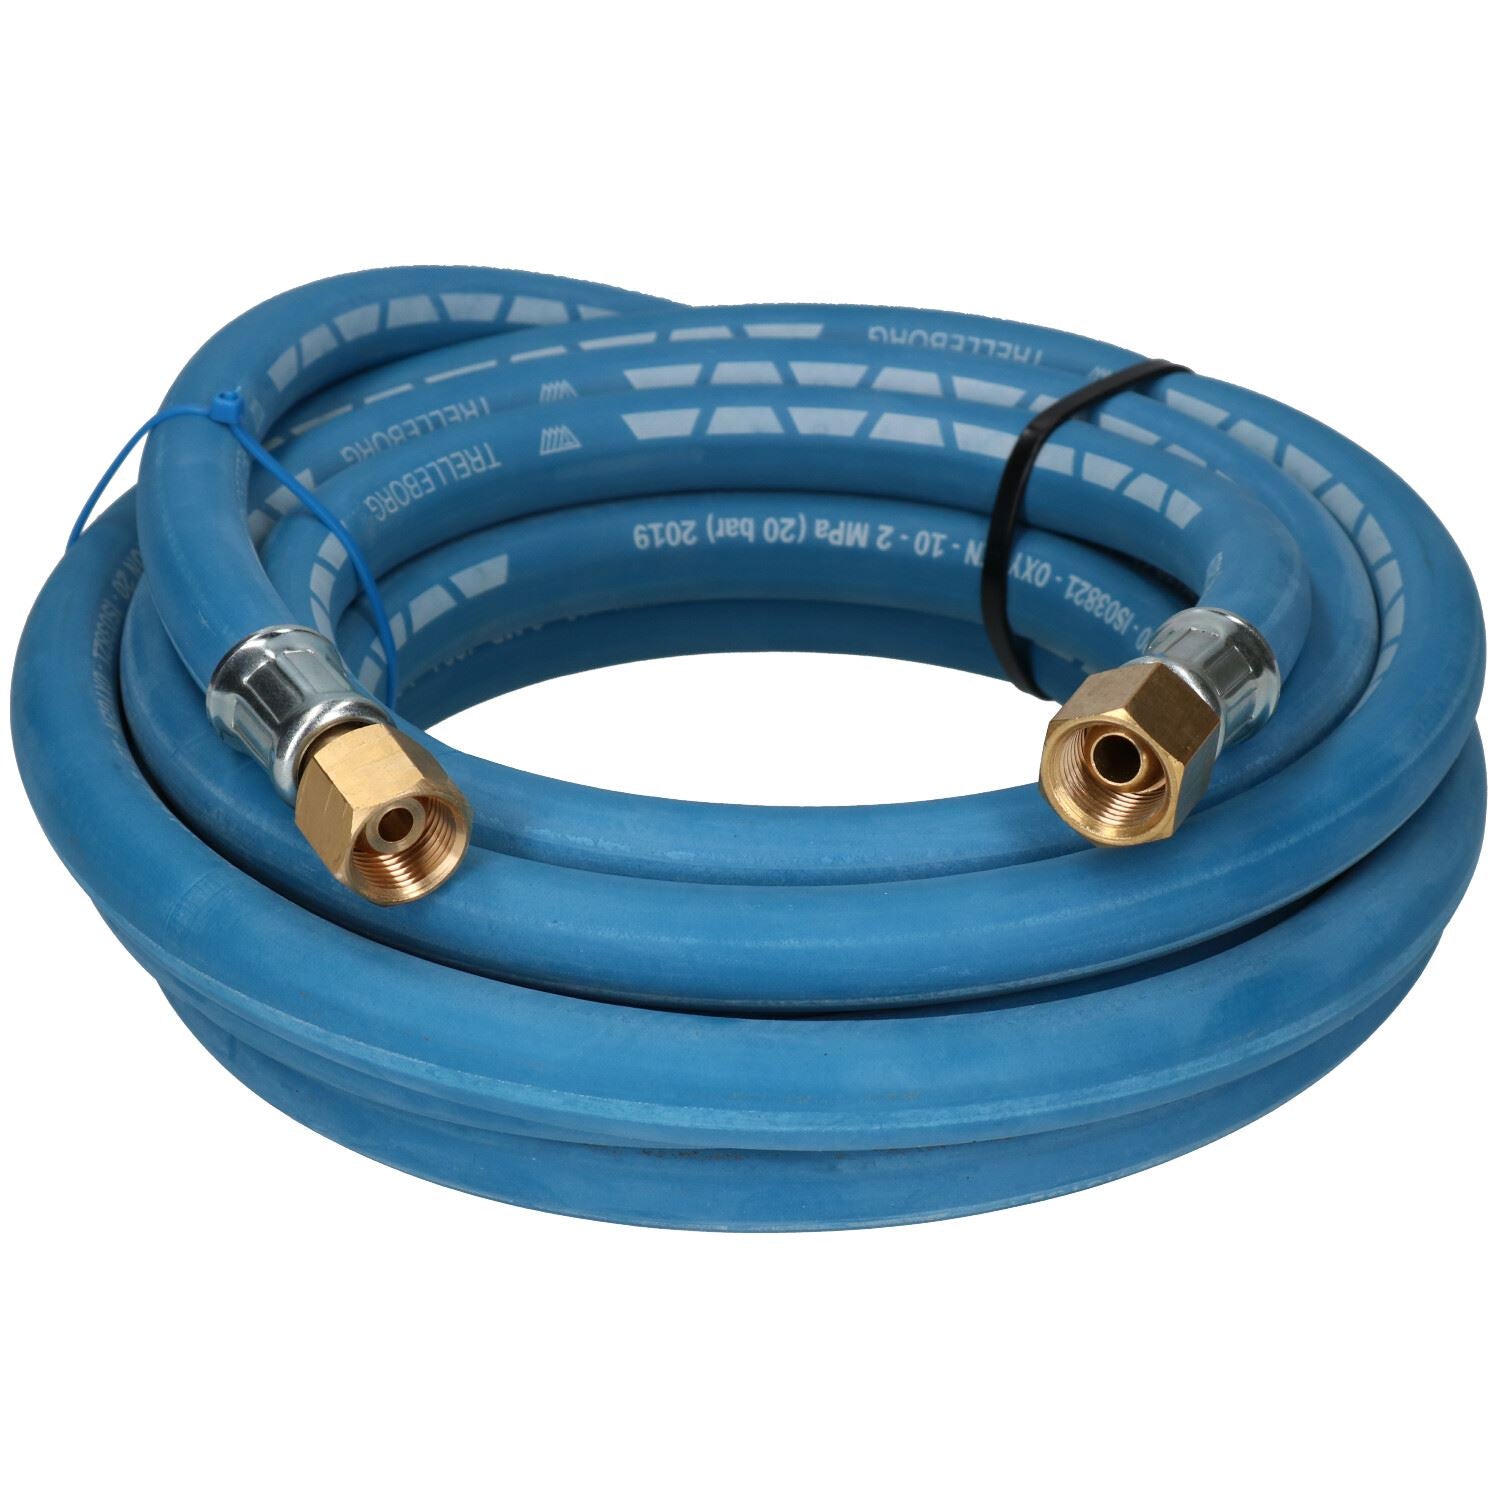 Single Oxygen Fitted Rubber Hose Pipe Cutting & Welding 5M 3/8" BSP Gas Blue